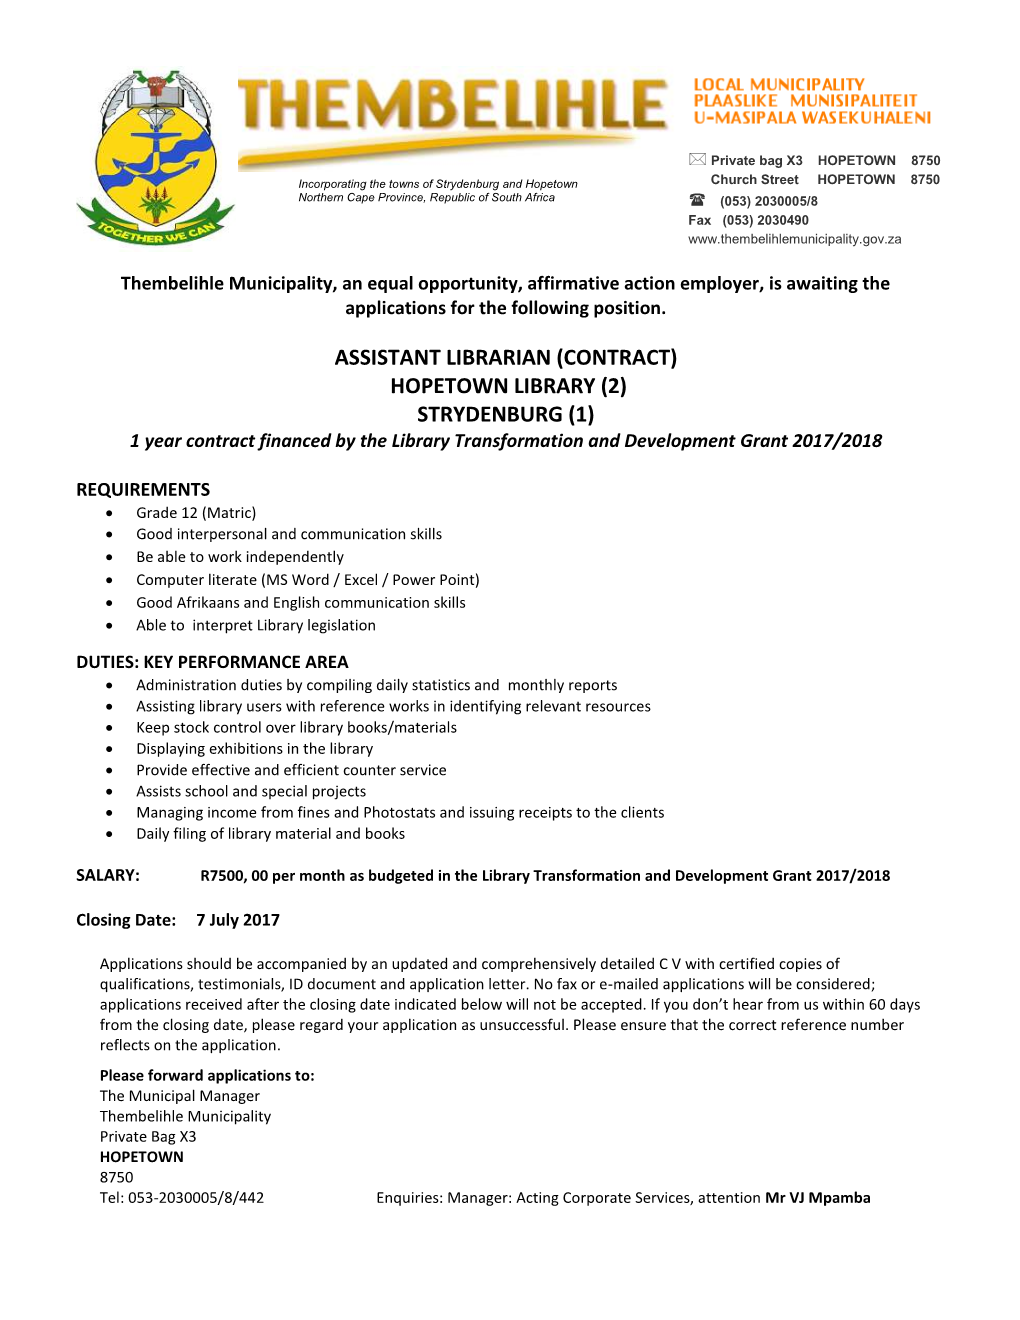 ASSISTANT LIBRARIAN (CONTRACT) HOPETOWN LIBRARY (2) STRYDENBURG (1) 1 Year Contract Financed by the Library Transformation and Development Grant 2017/2018